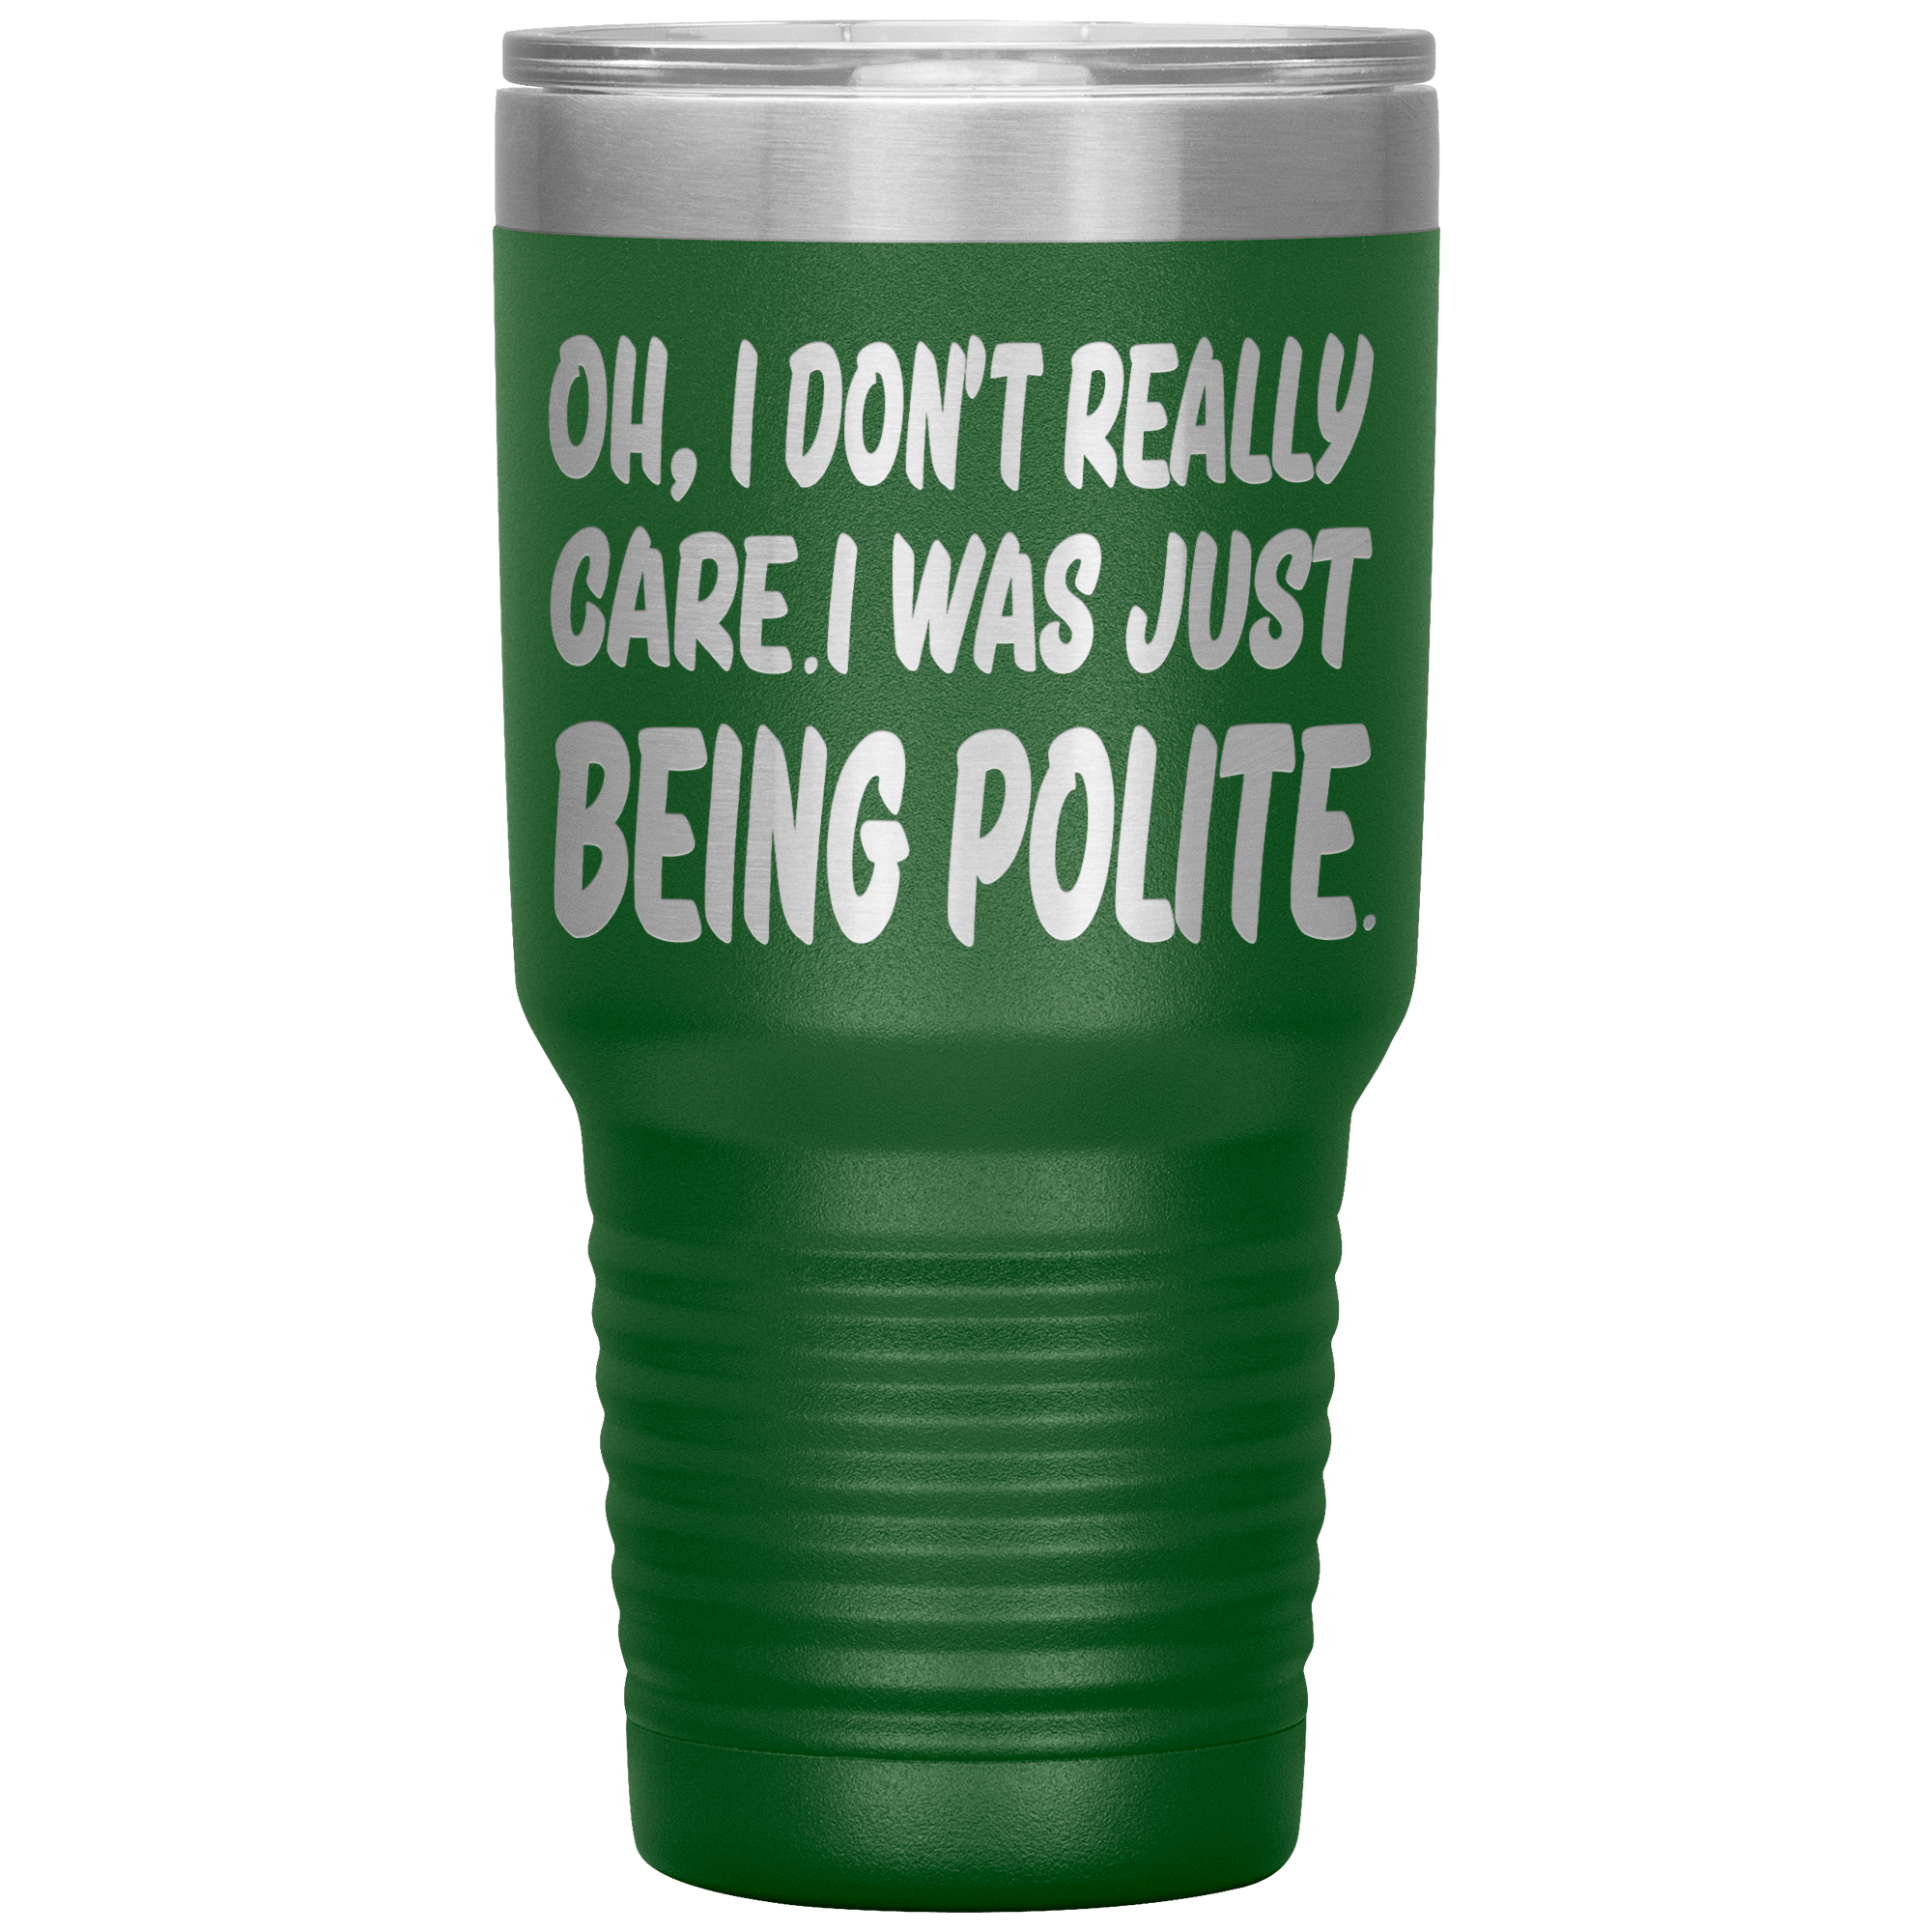 I DON'T REALLY CARE I WAS JUST BEING POLITE - TUMBLER